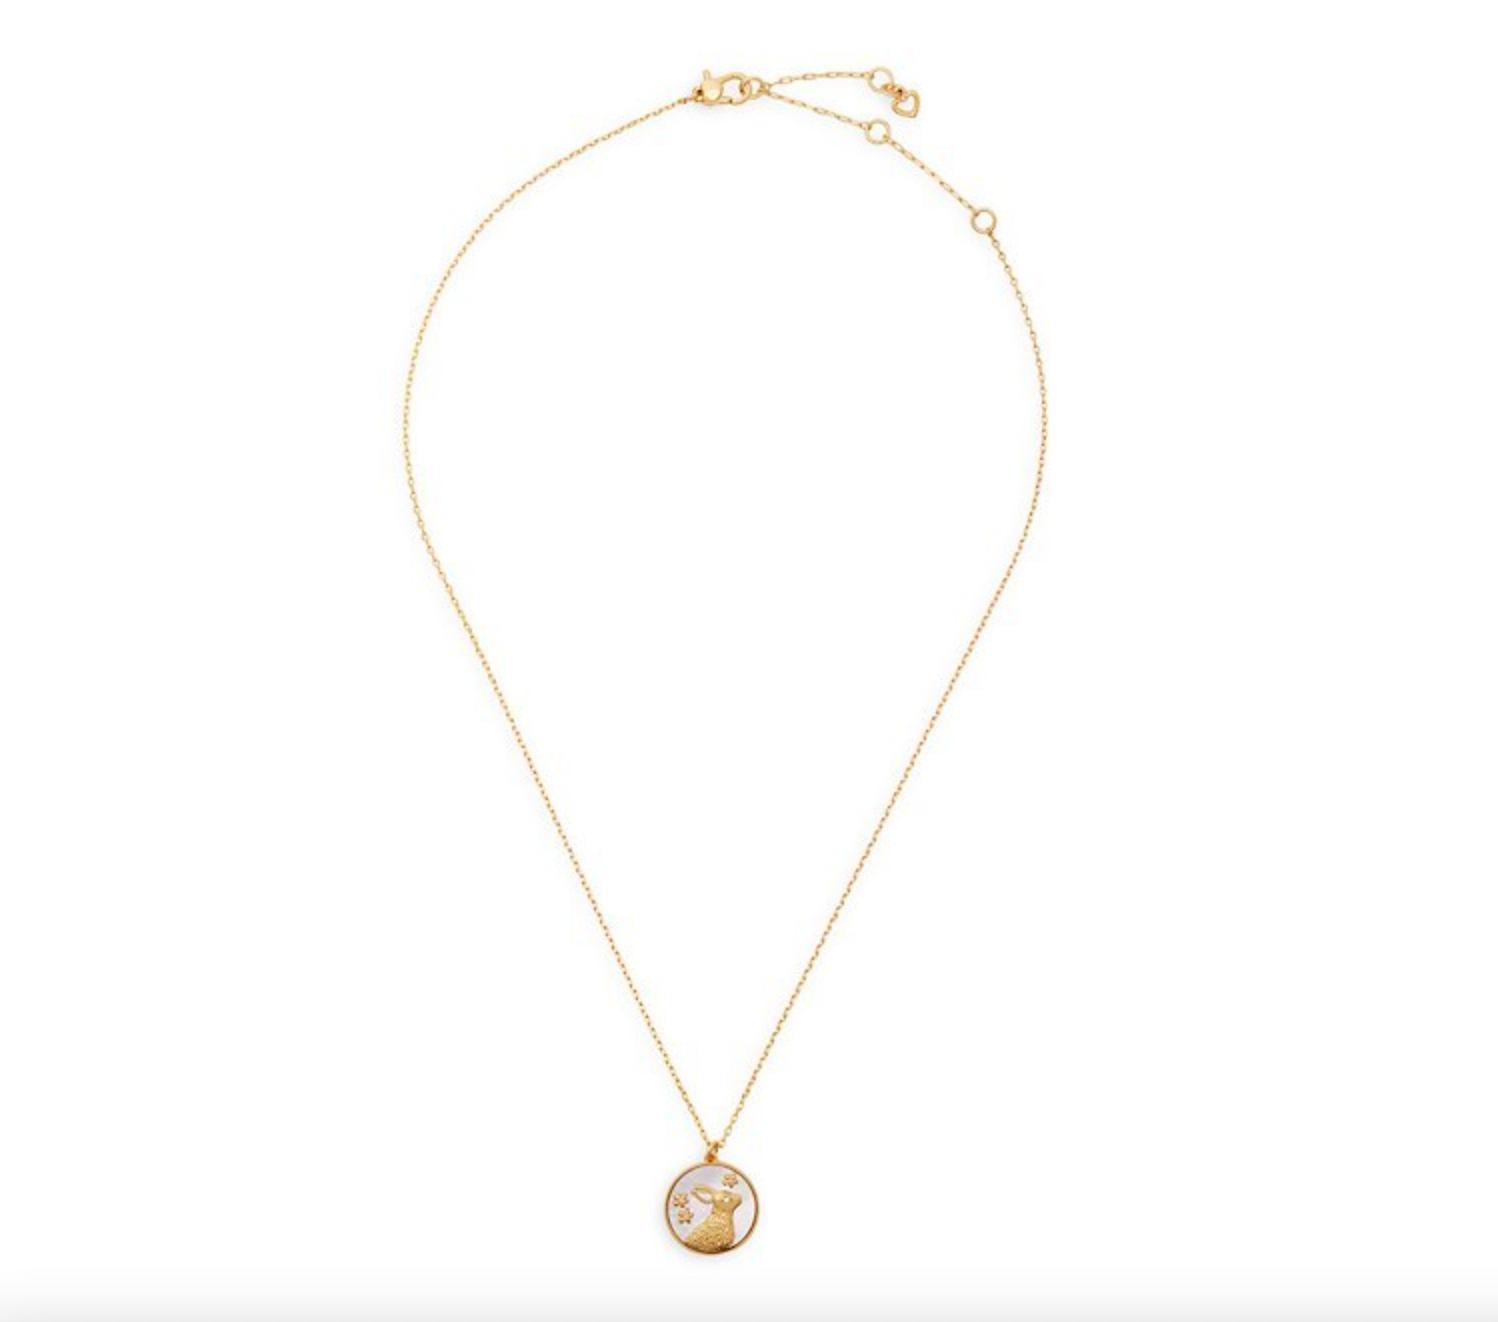 Kate Spade + Year Of The Rabbit Goldtone Pendant Necklace